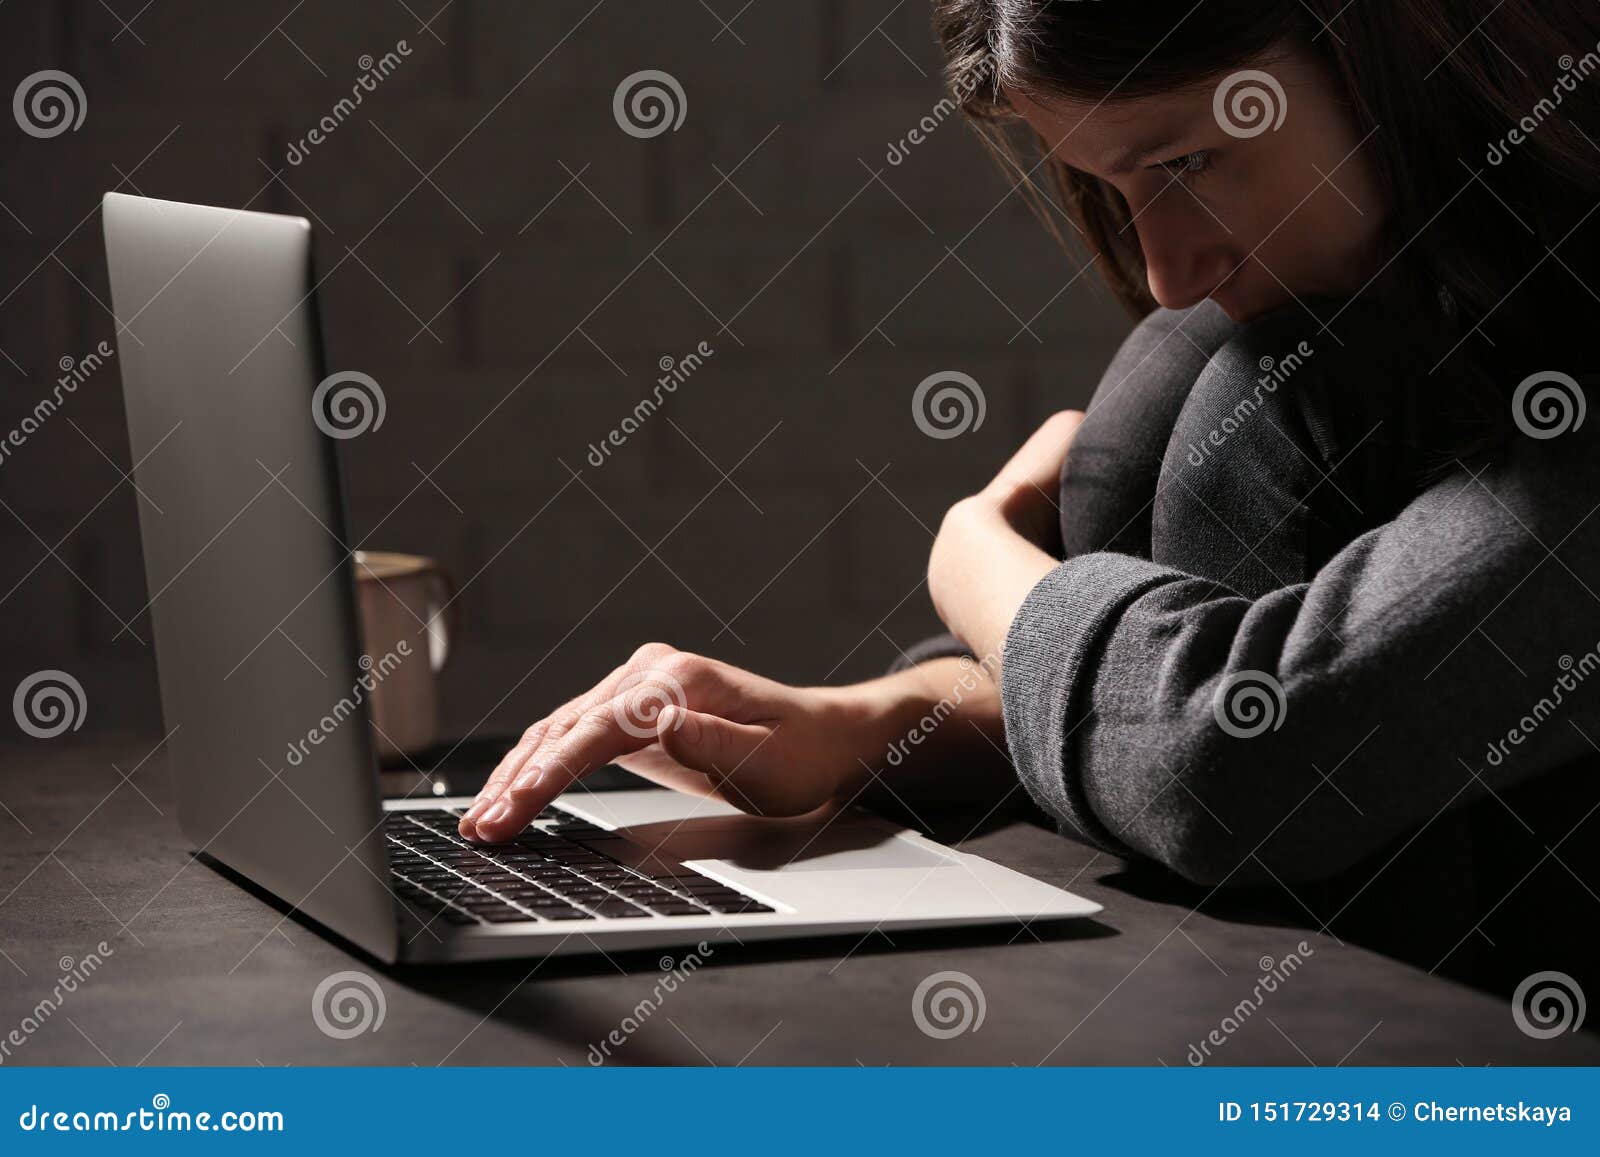 woman using laptop at table against. loneliness concept